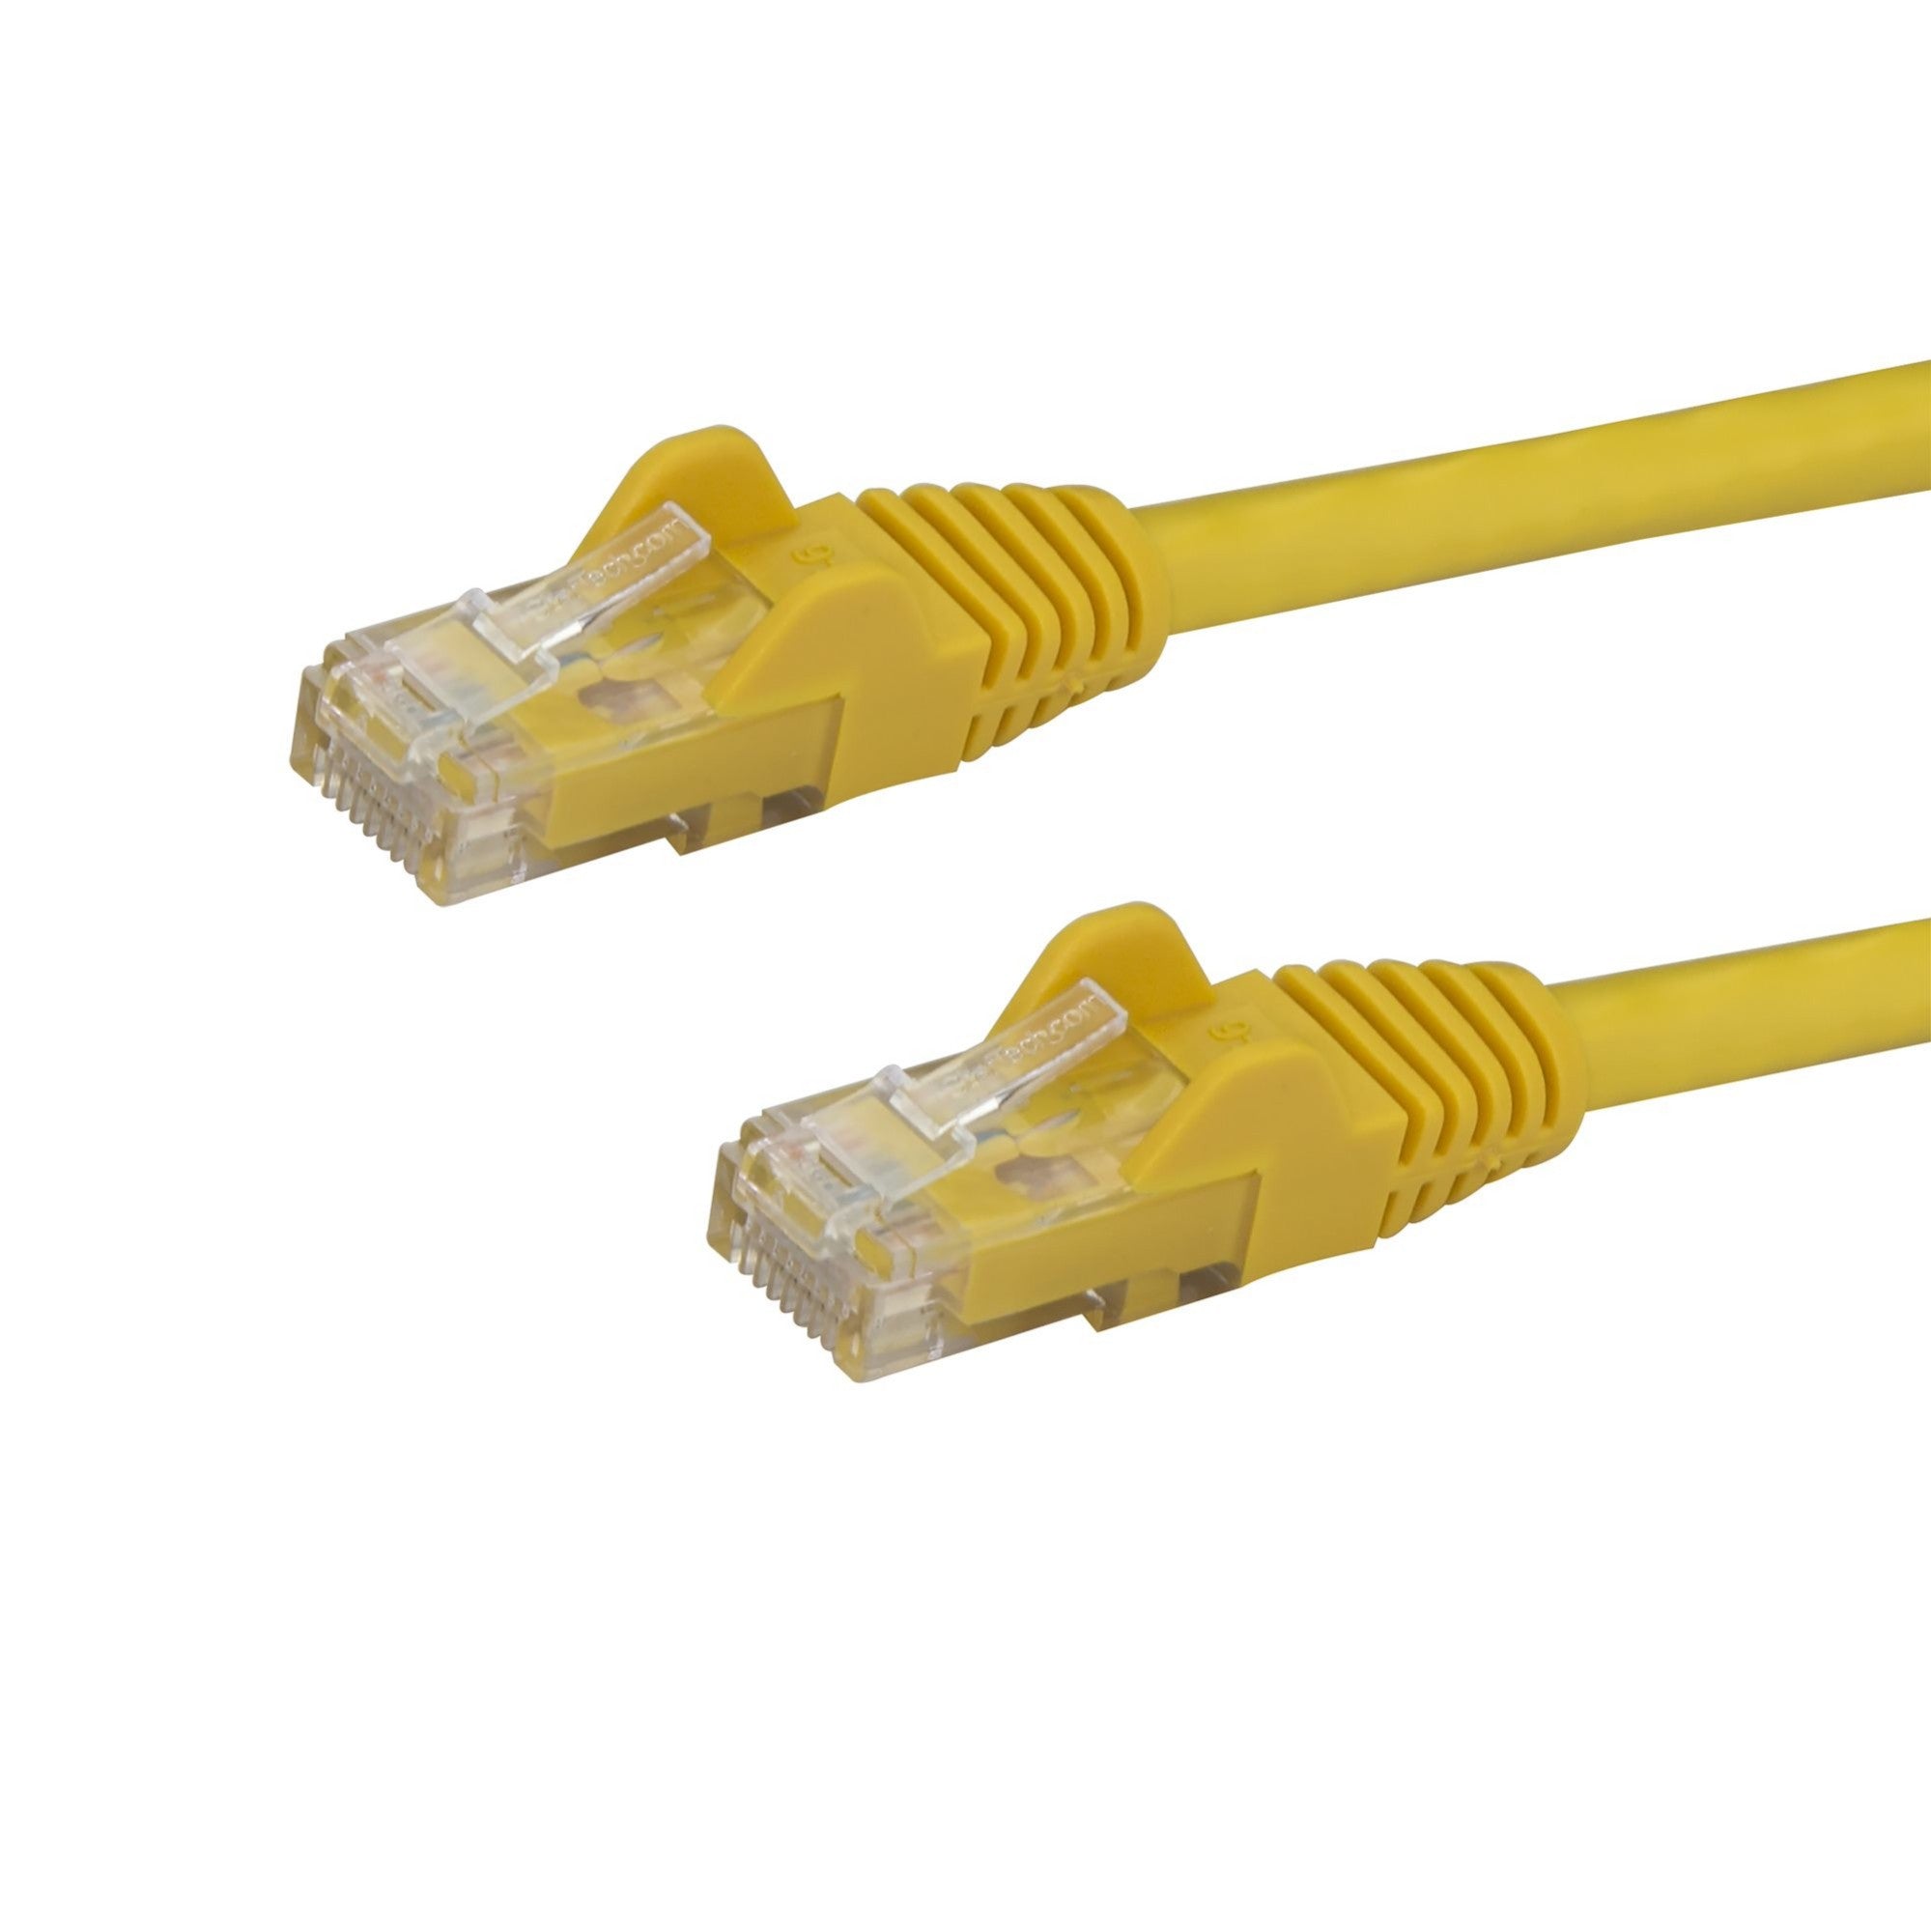 StarTech.com 75ft CAT6 Ethernet Cable - Yellow CAT 6 Gigabit Ethernet Wire -650MHz 100W PoE RJ45 UTP Network/Patch Cord Snagless w/Strain Relief Fluke Tested/Wiring is UL Certified/TIA